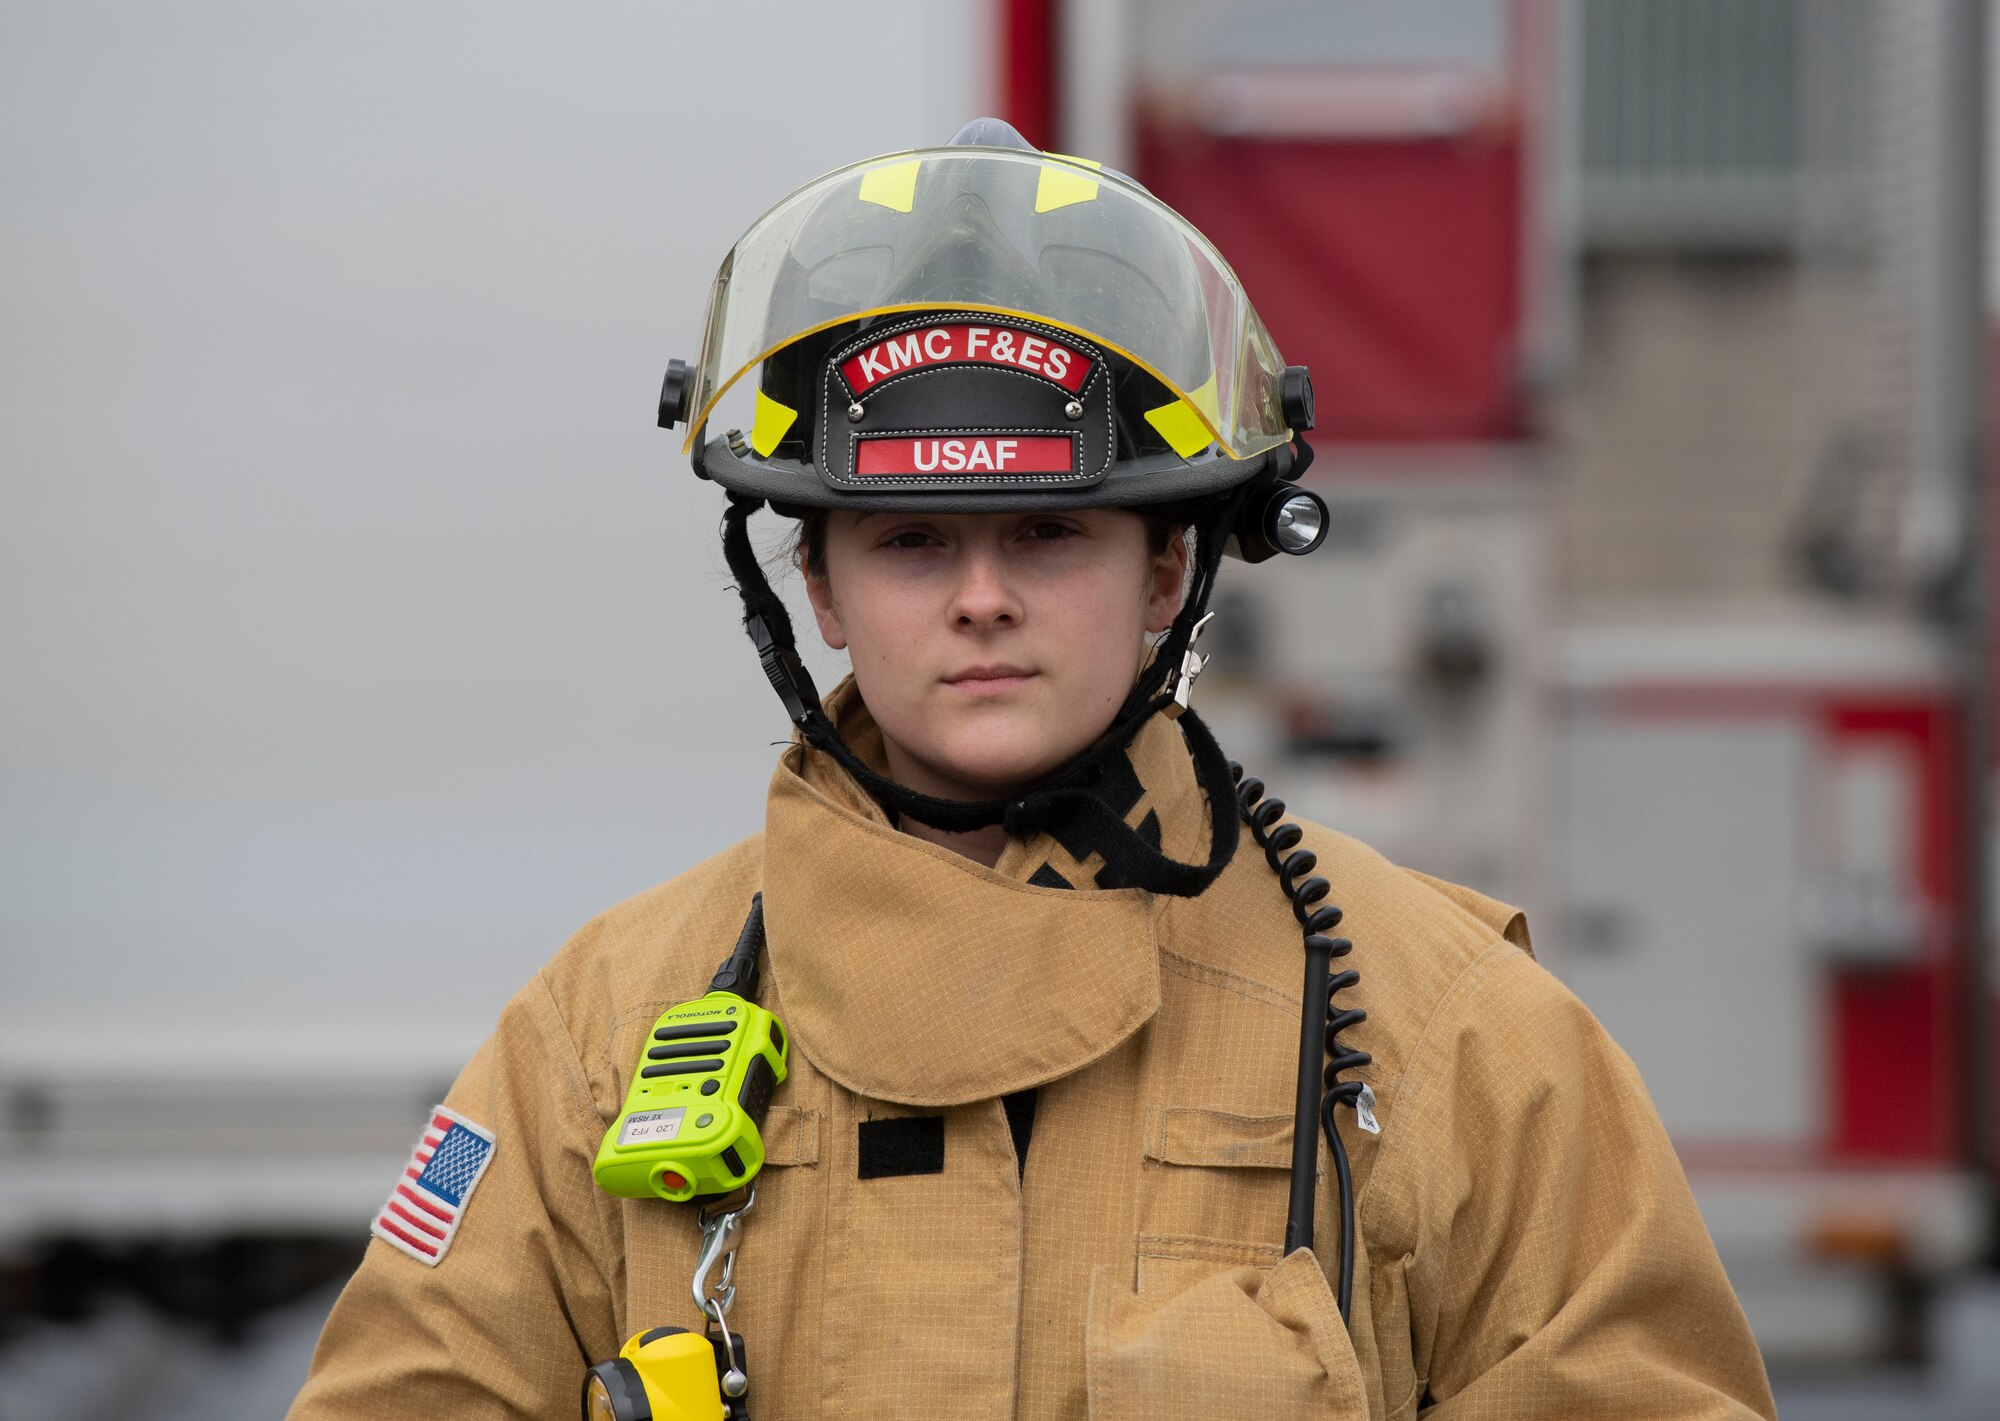 A firefighter poses in gear in front of a fire truck